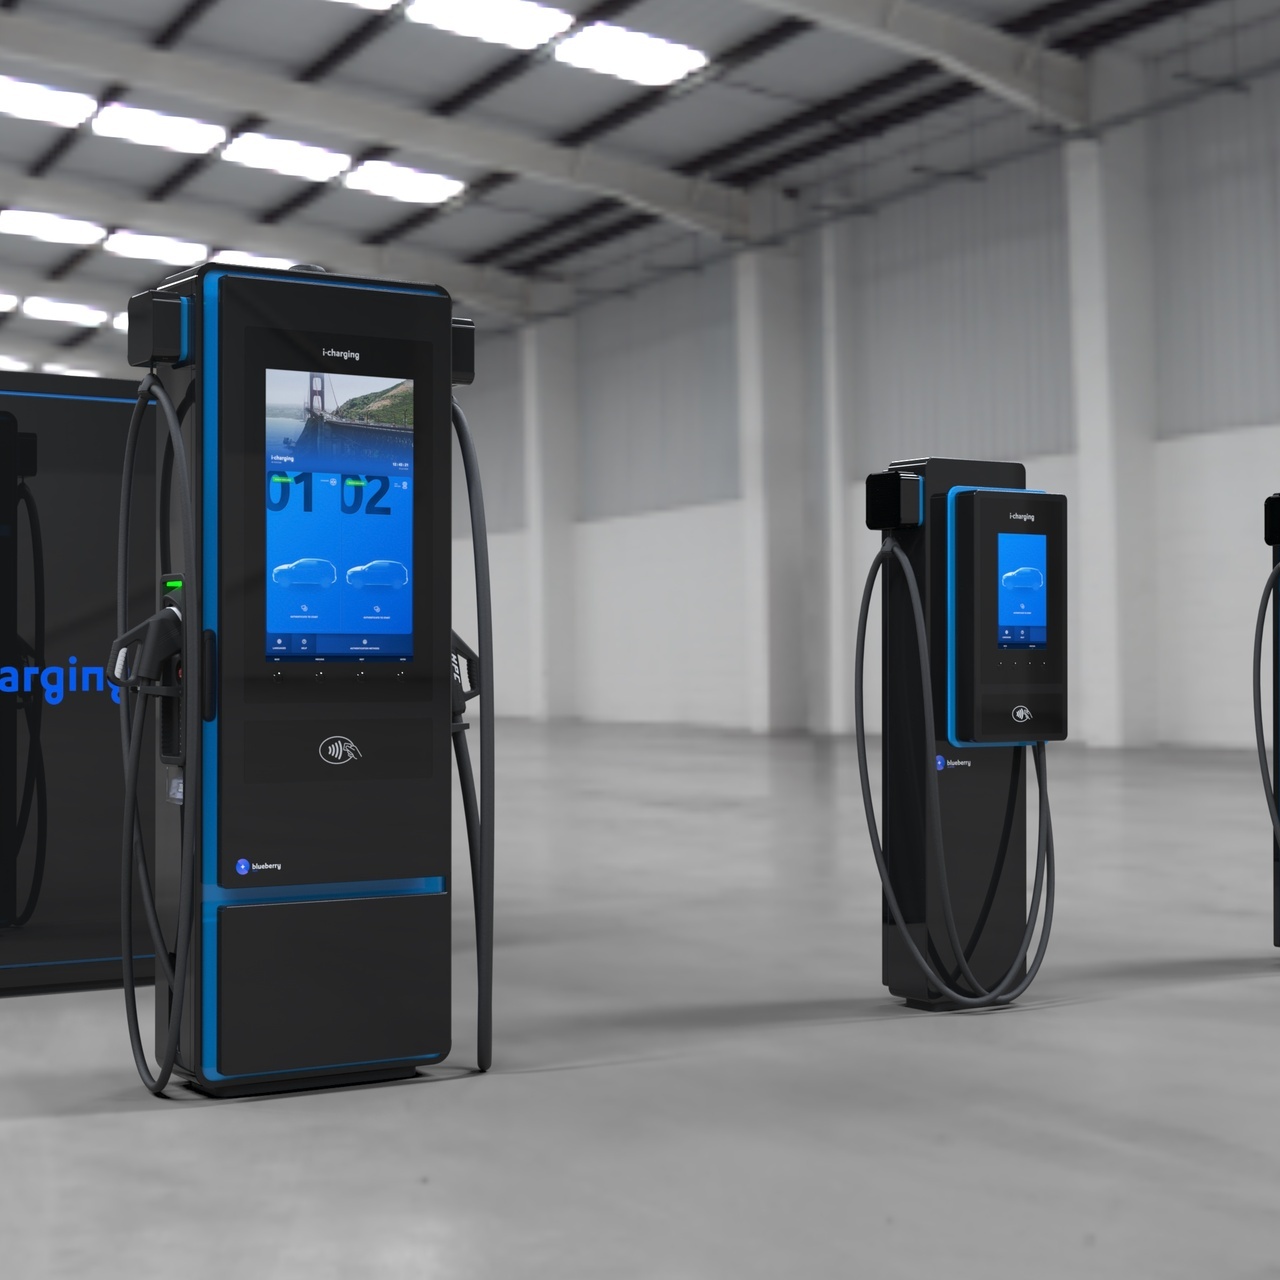 i-charging presented blueberryTM: first range of fast chargers in October 2020